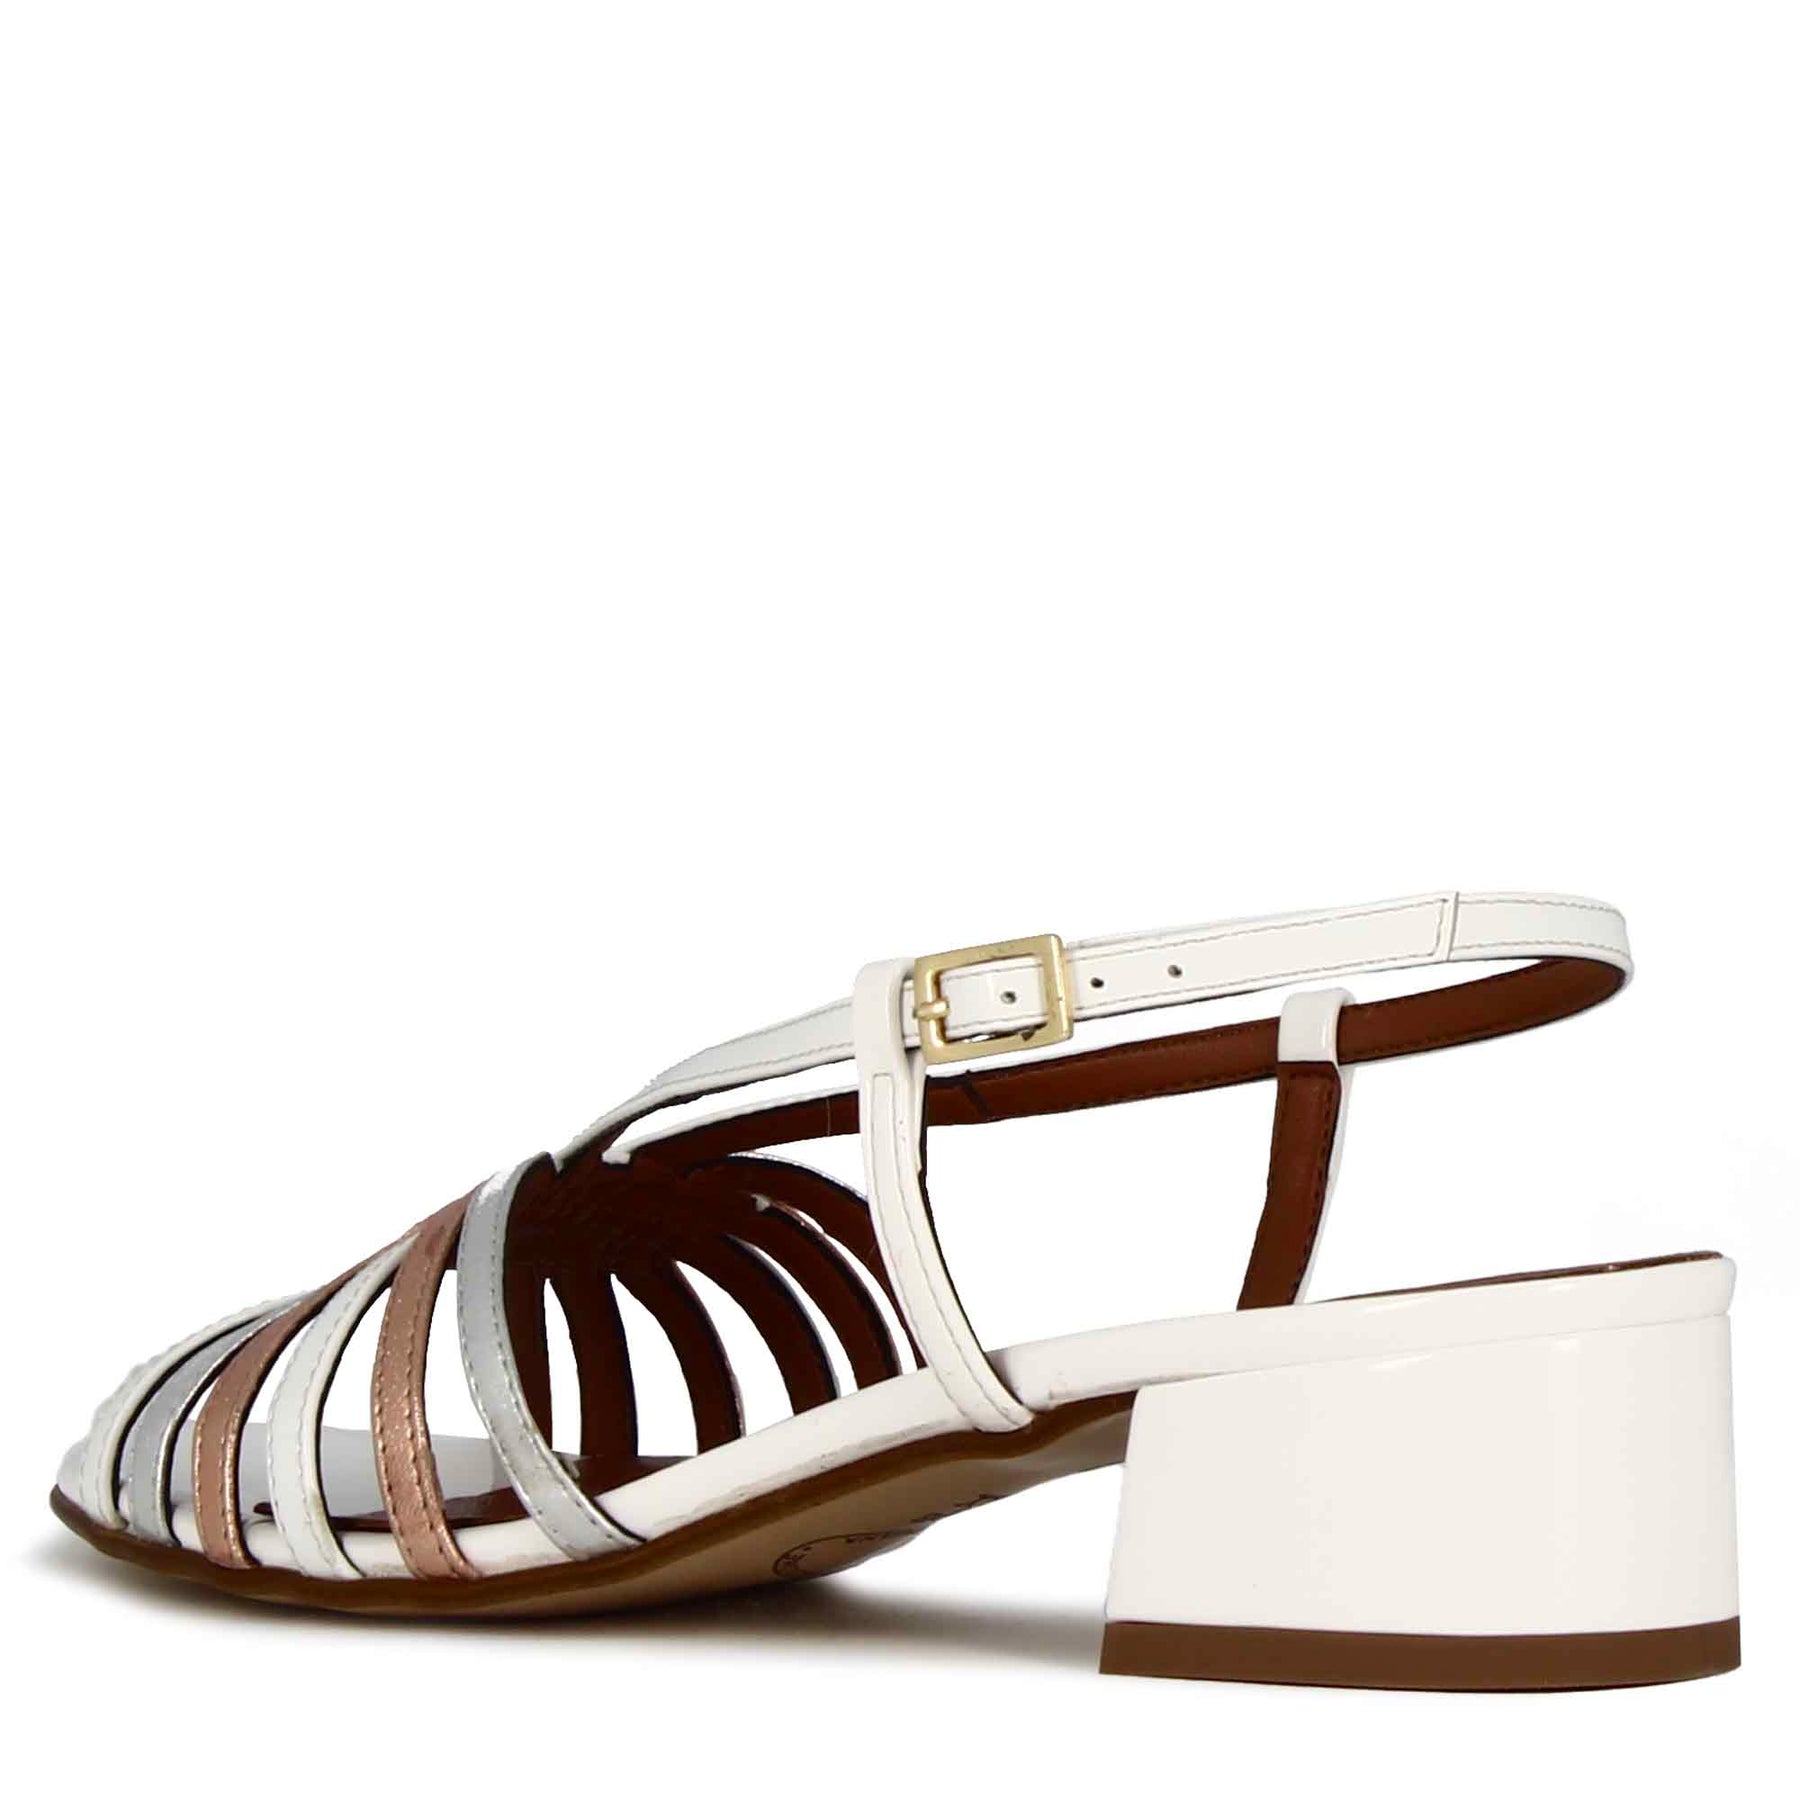 Women's sandal with copper and gold colored laminated leather bands